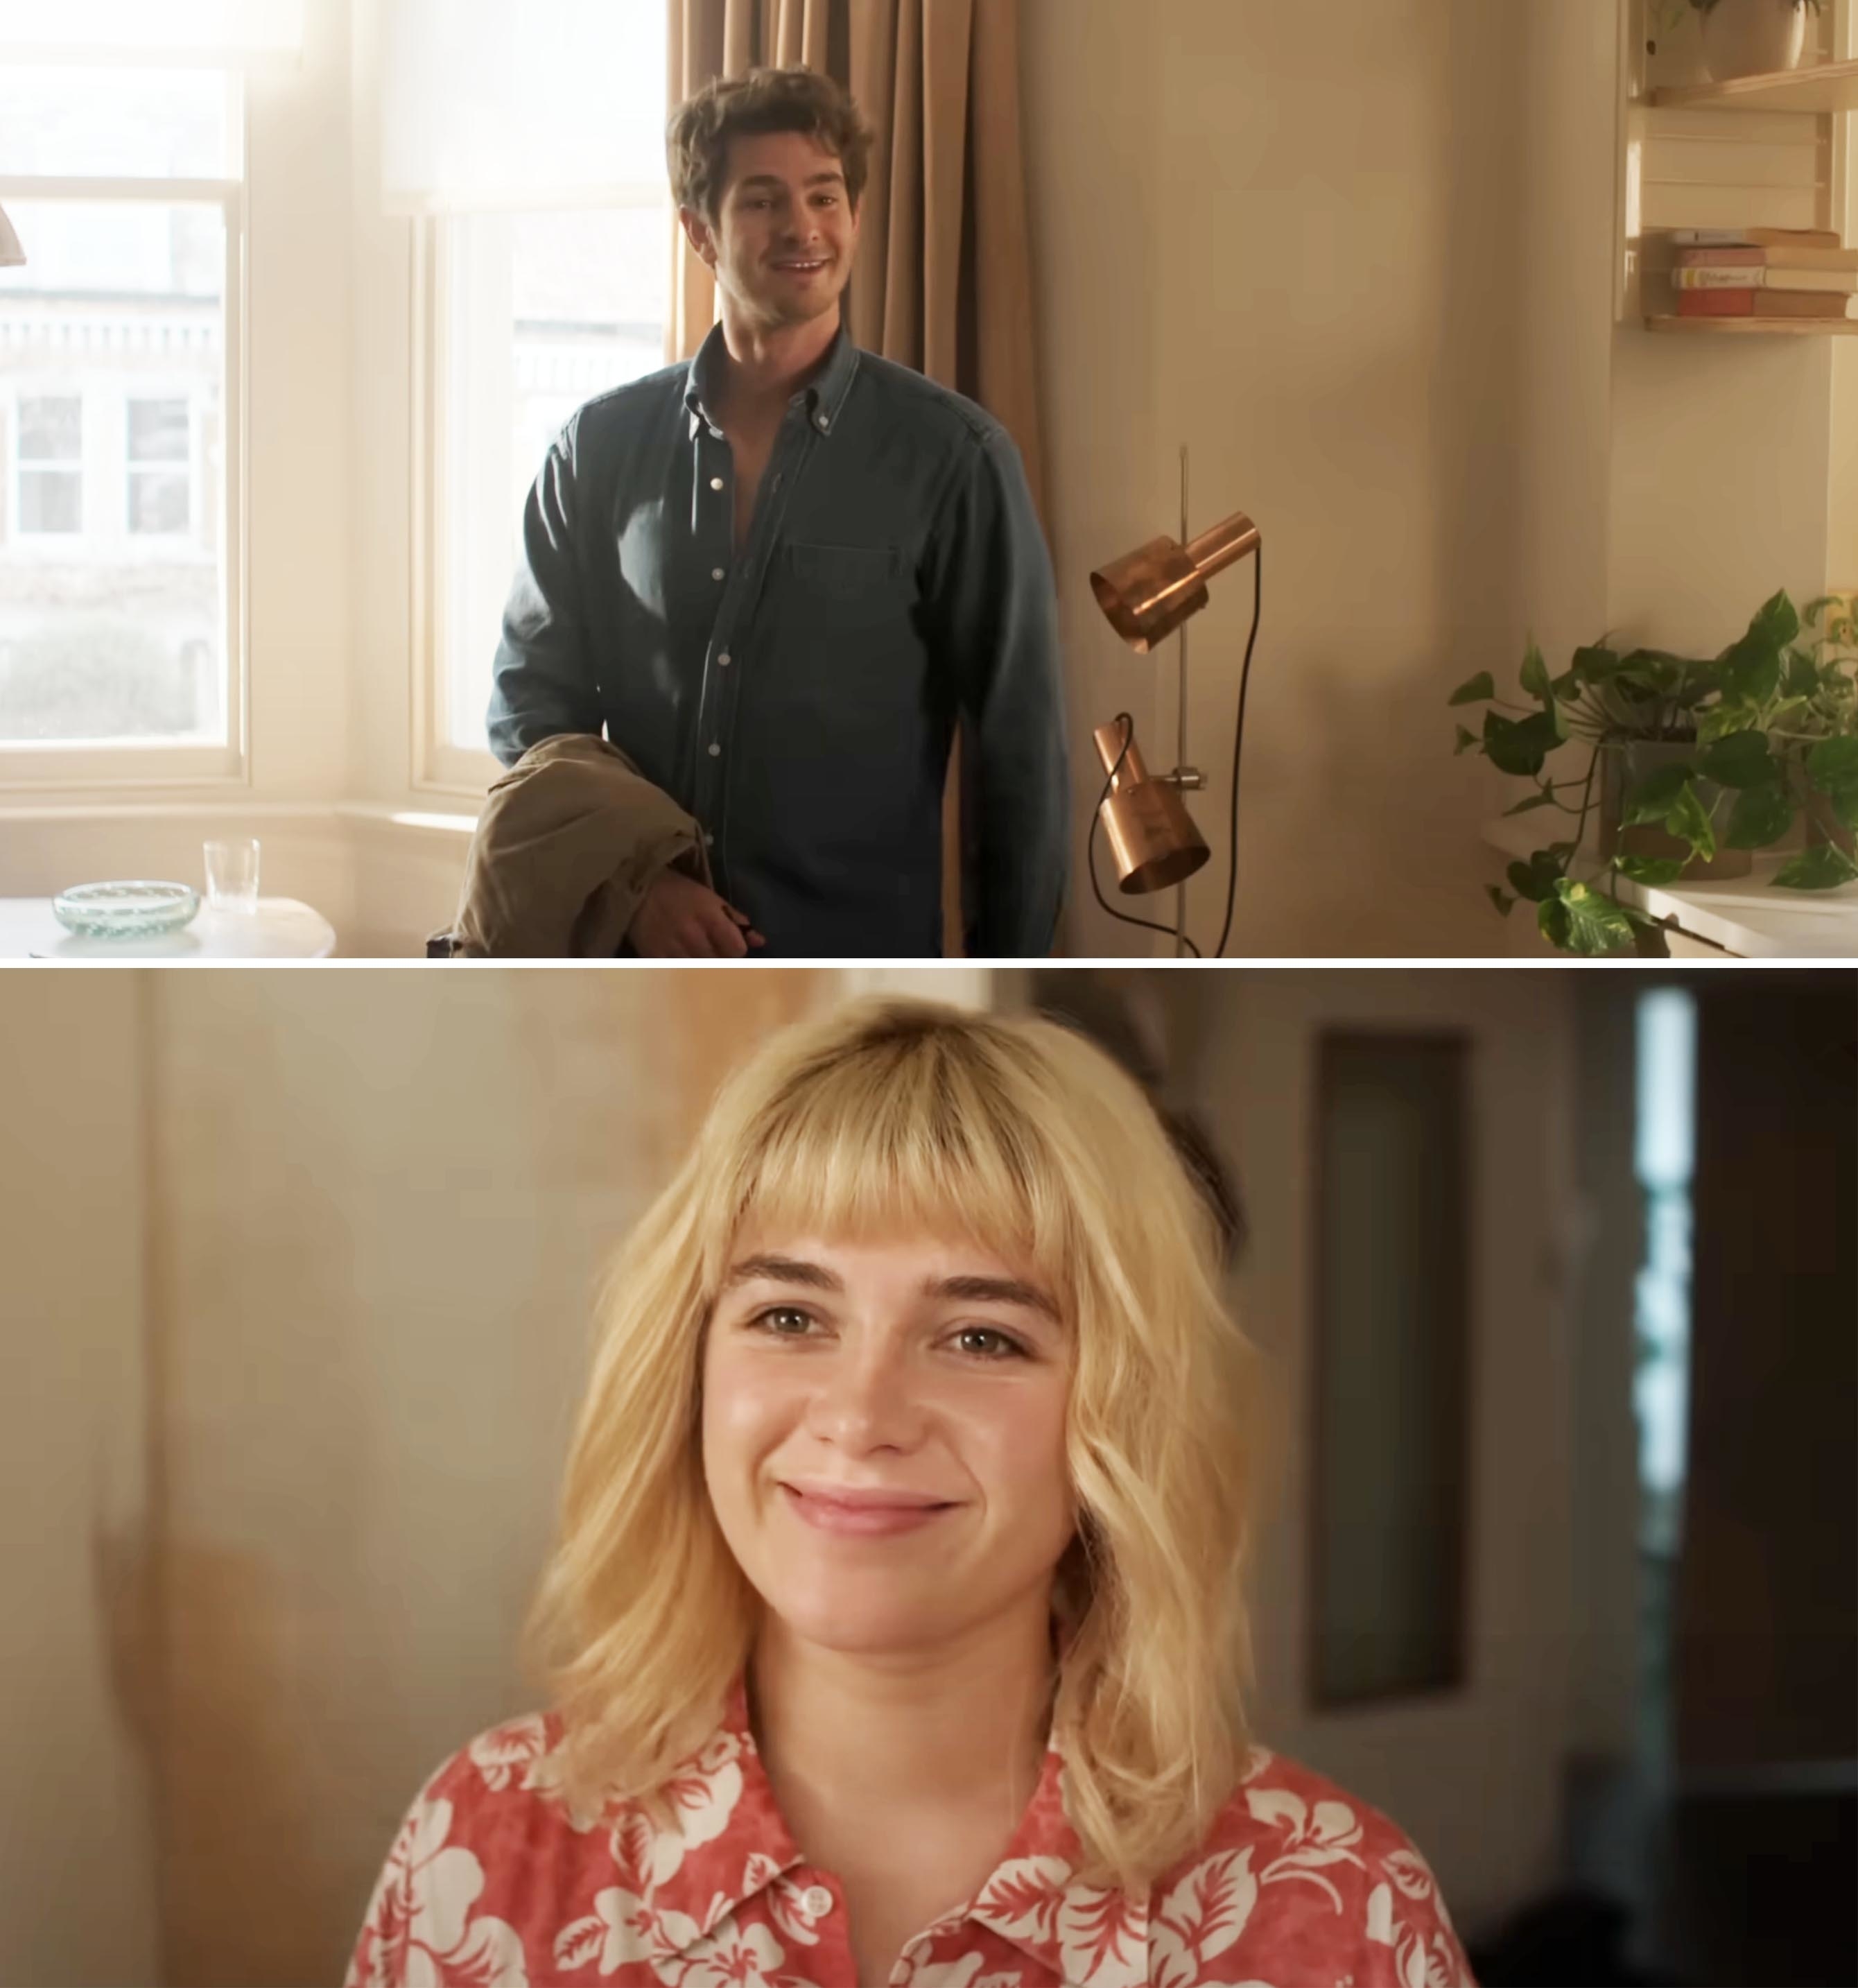 Andrew Garfield and Florence Pugh in a cozy home setting, smiling at each other warmly